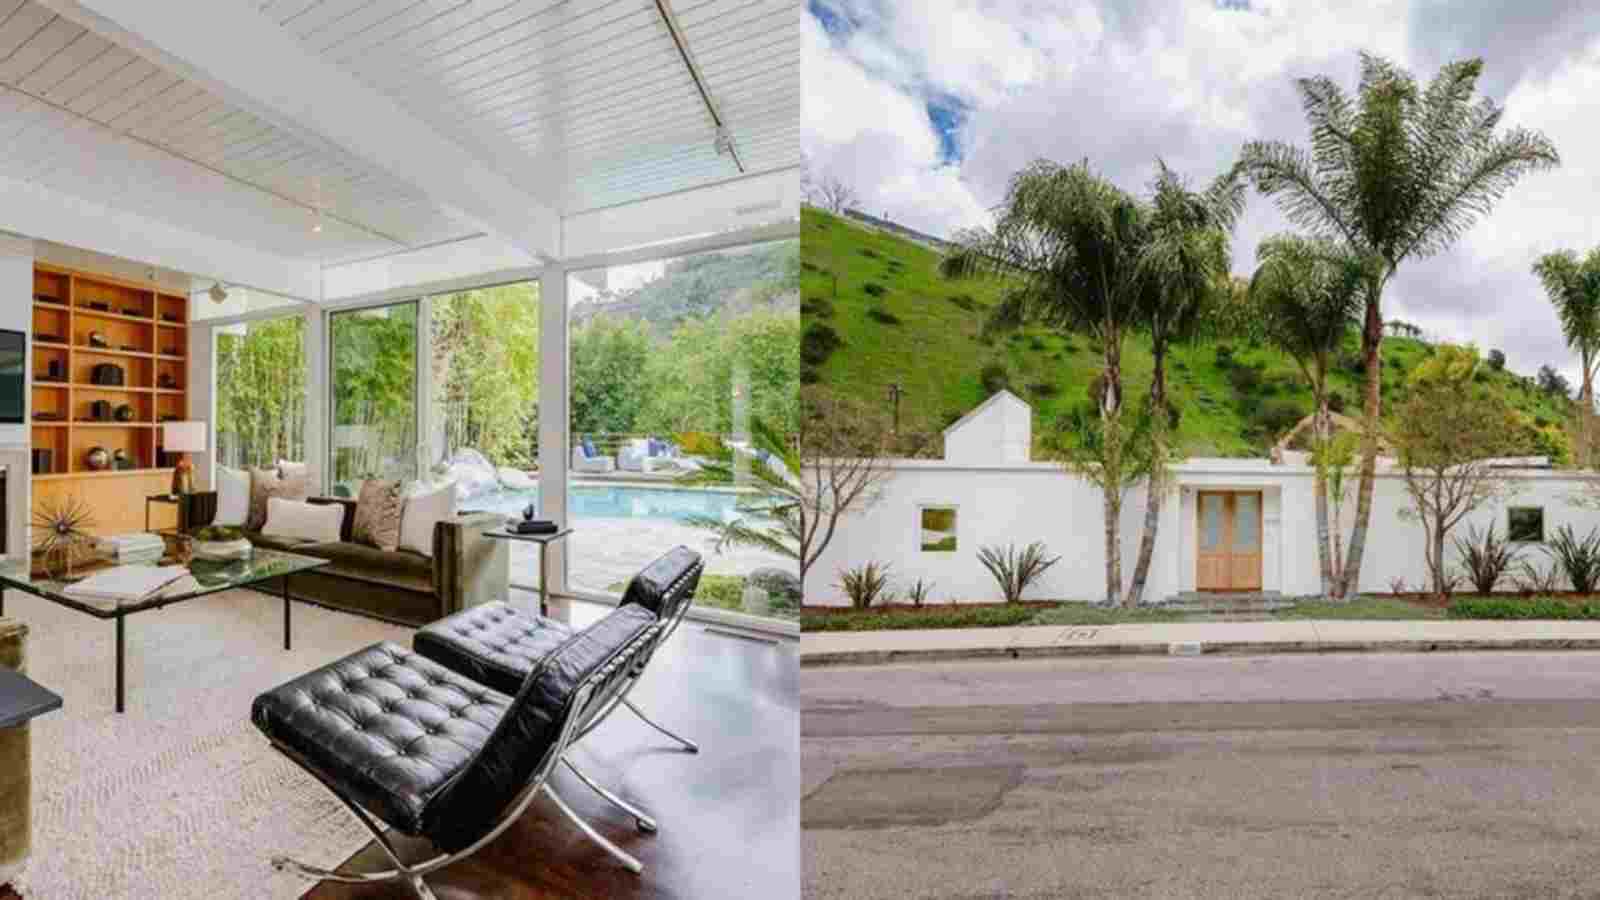 Taylor Swift's mid-century modern home in Los Angeles